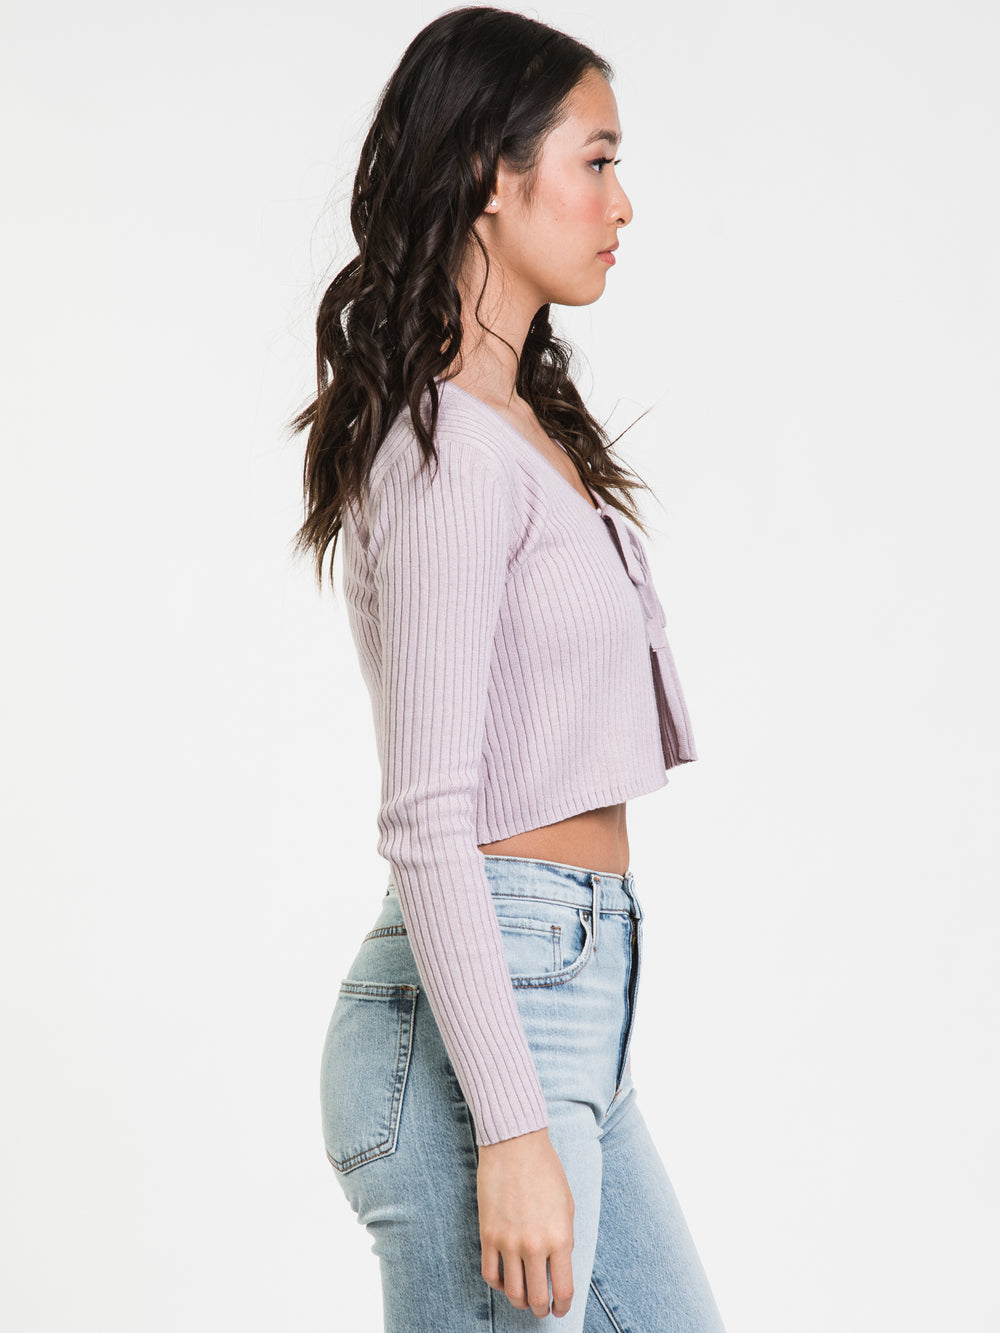 HARLOW WHITNEY LONG SLEEVE TEE UP - DÉSTOCKAGE